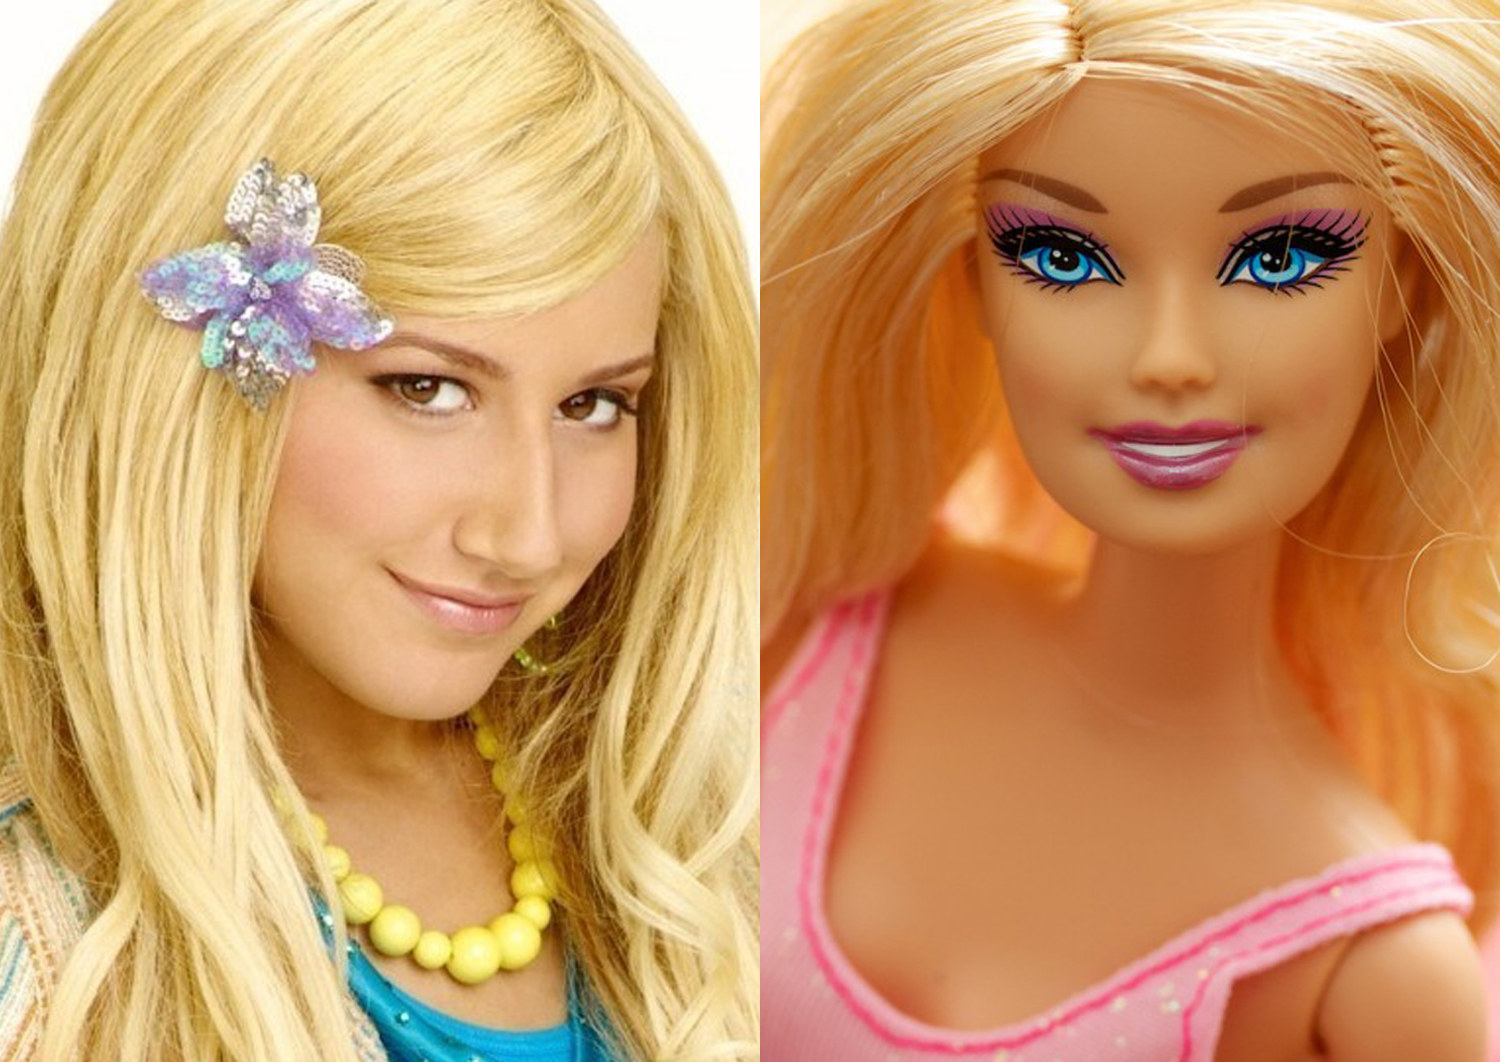 Microprocessor George Bernard Indrukwekkend Someone Compared Sharpay And Troy To Barbie And Ken Dolls And I'm Shook